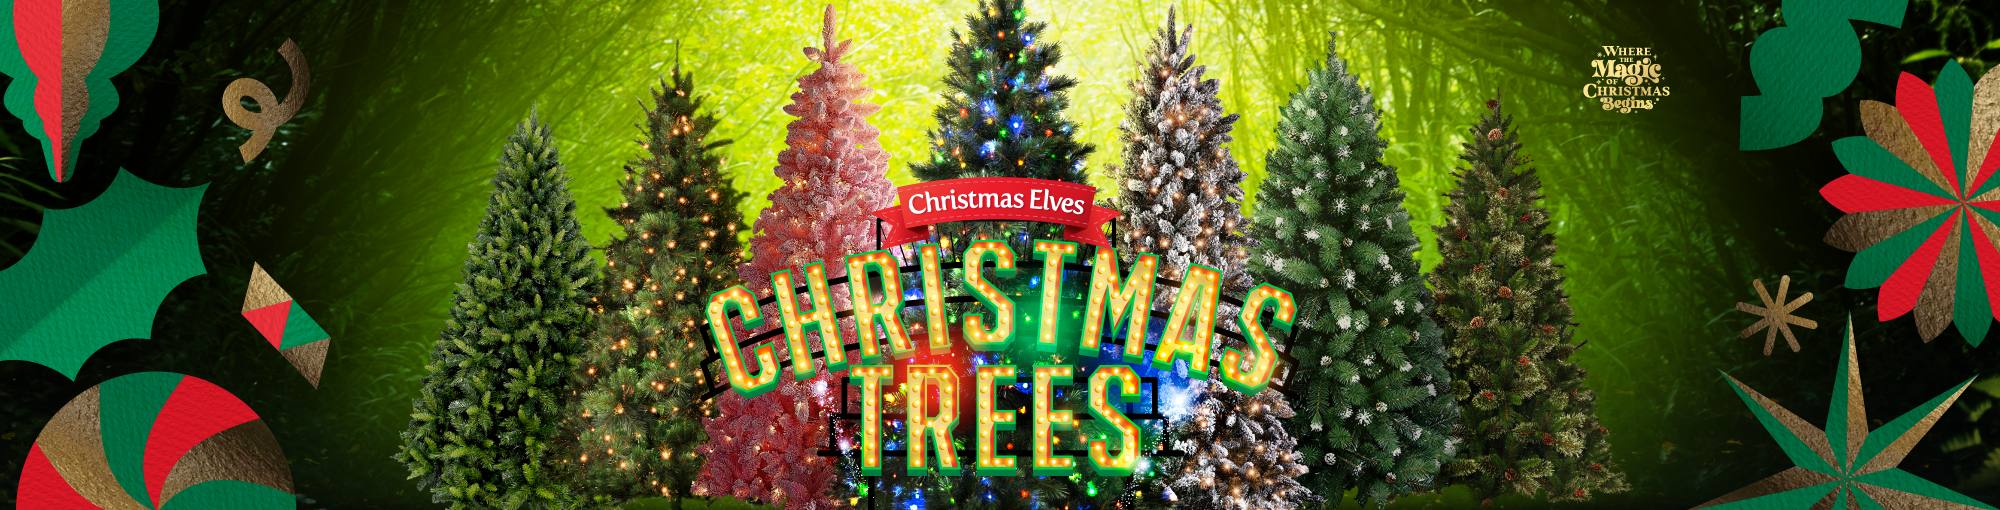 Artificial Christmas Trees at Christmas Elves